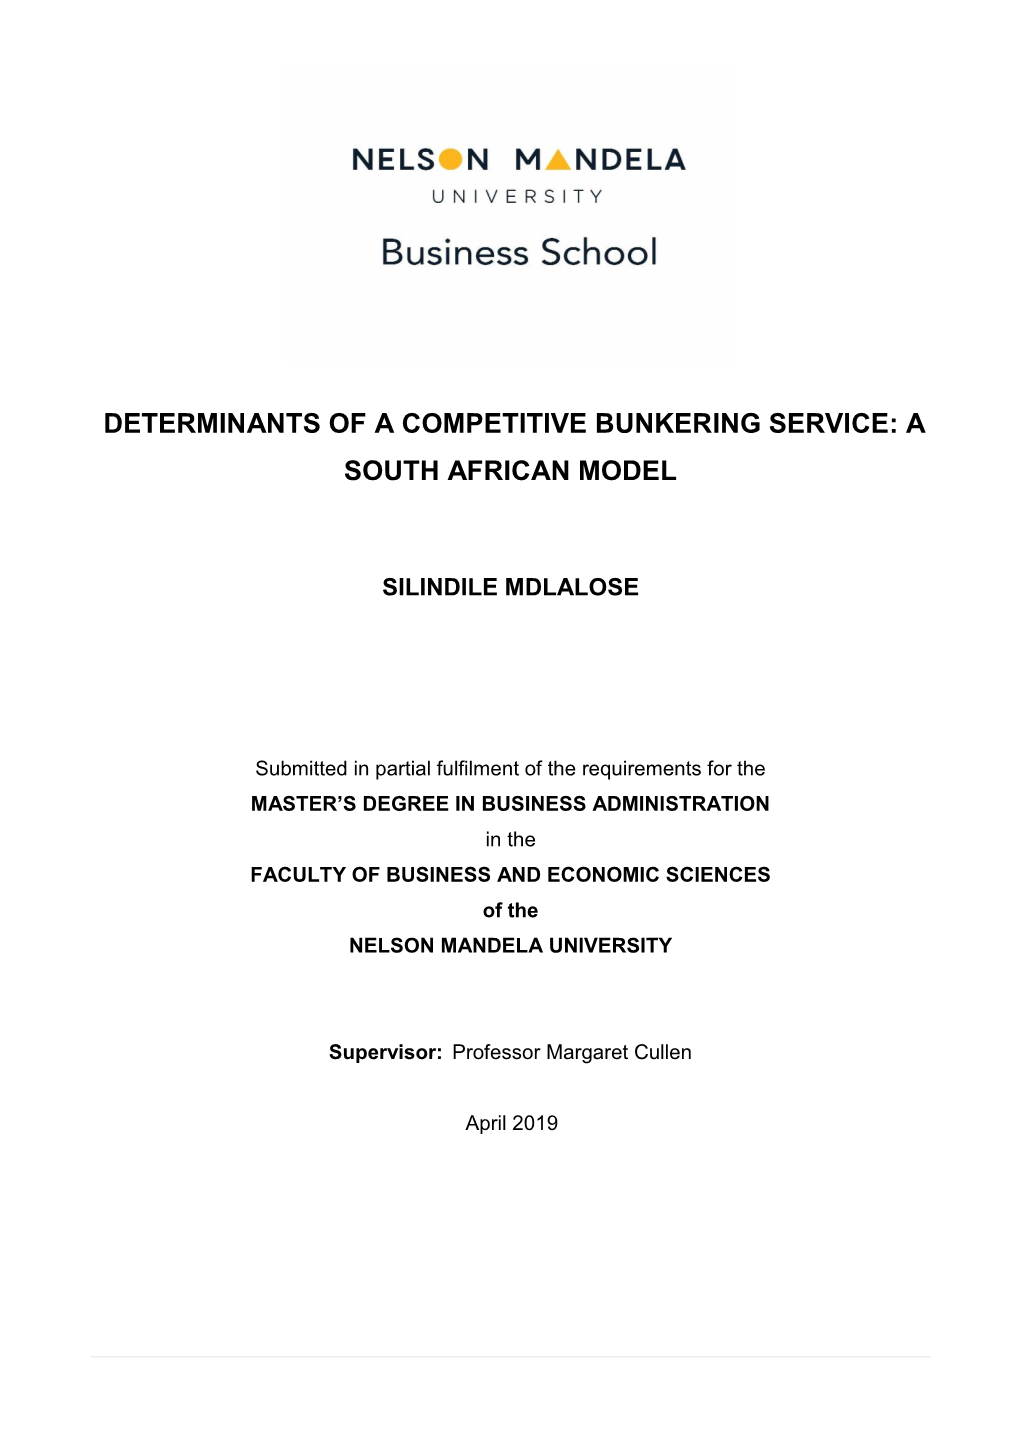 Determinants of a Competitive Bunkering Service: a South African Model